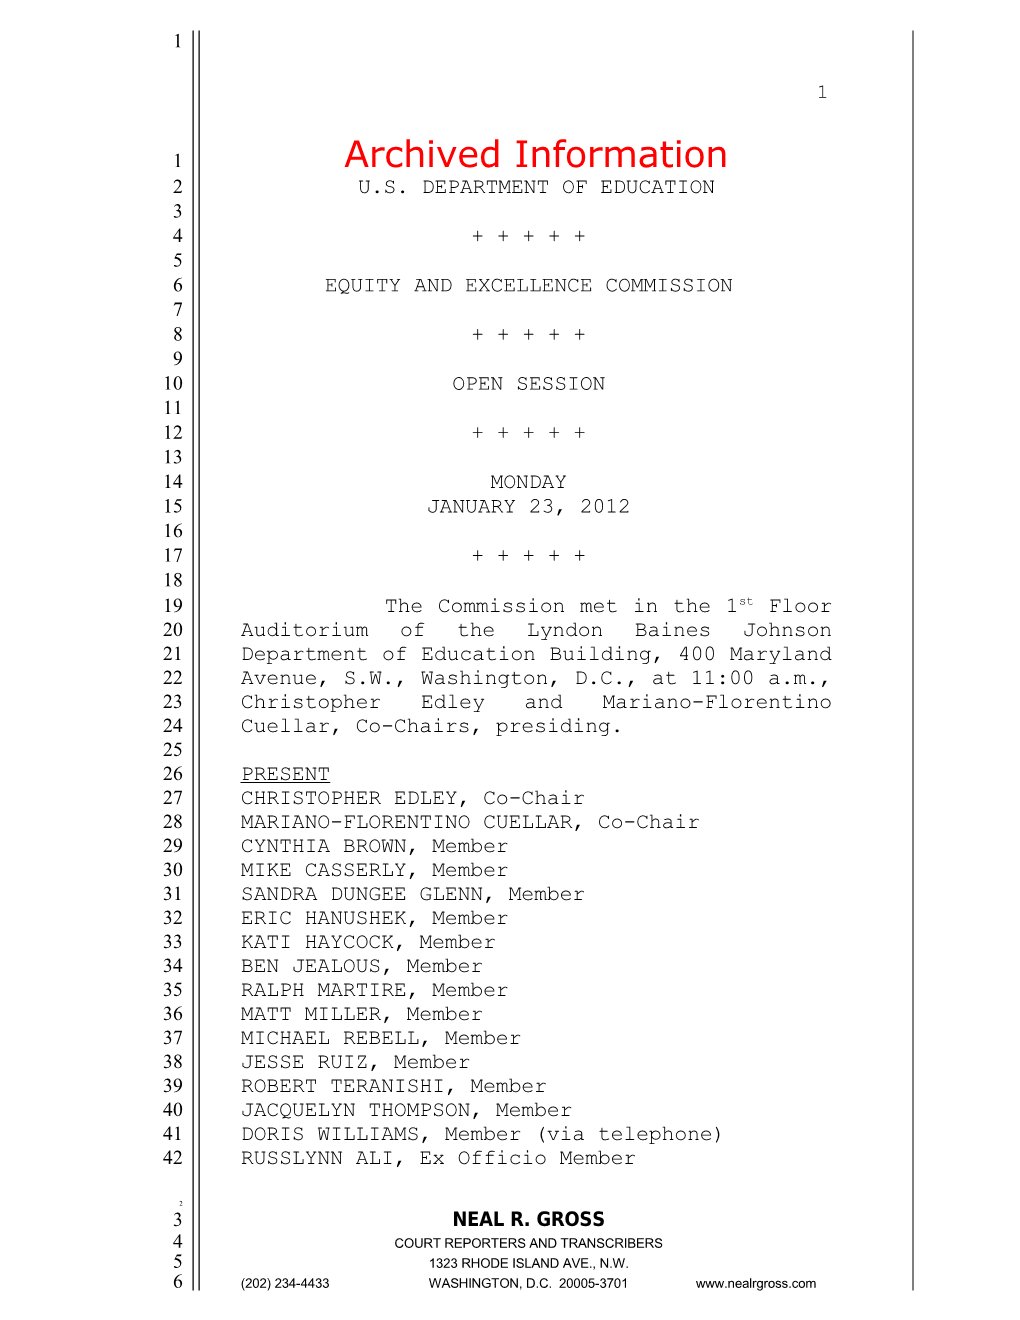 Archived Informatio: Transcript of January 23, 2012 Equity and Excellence Commission Meeting